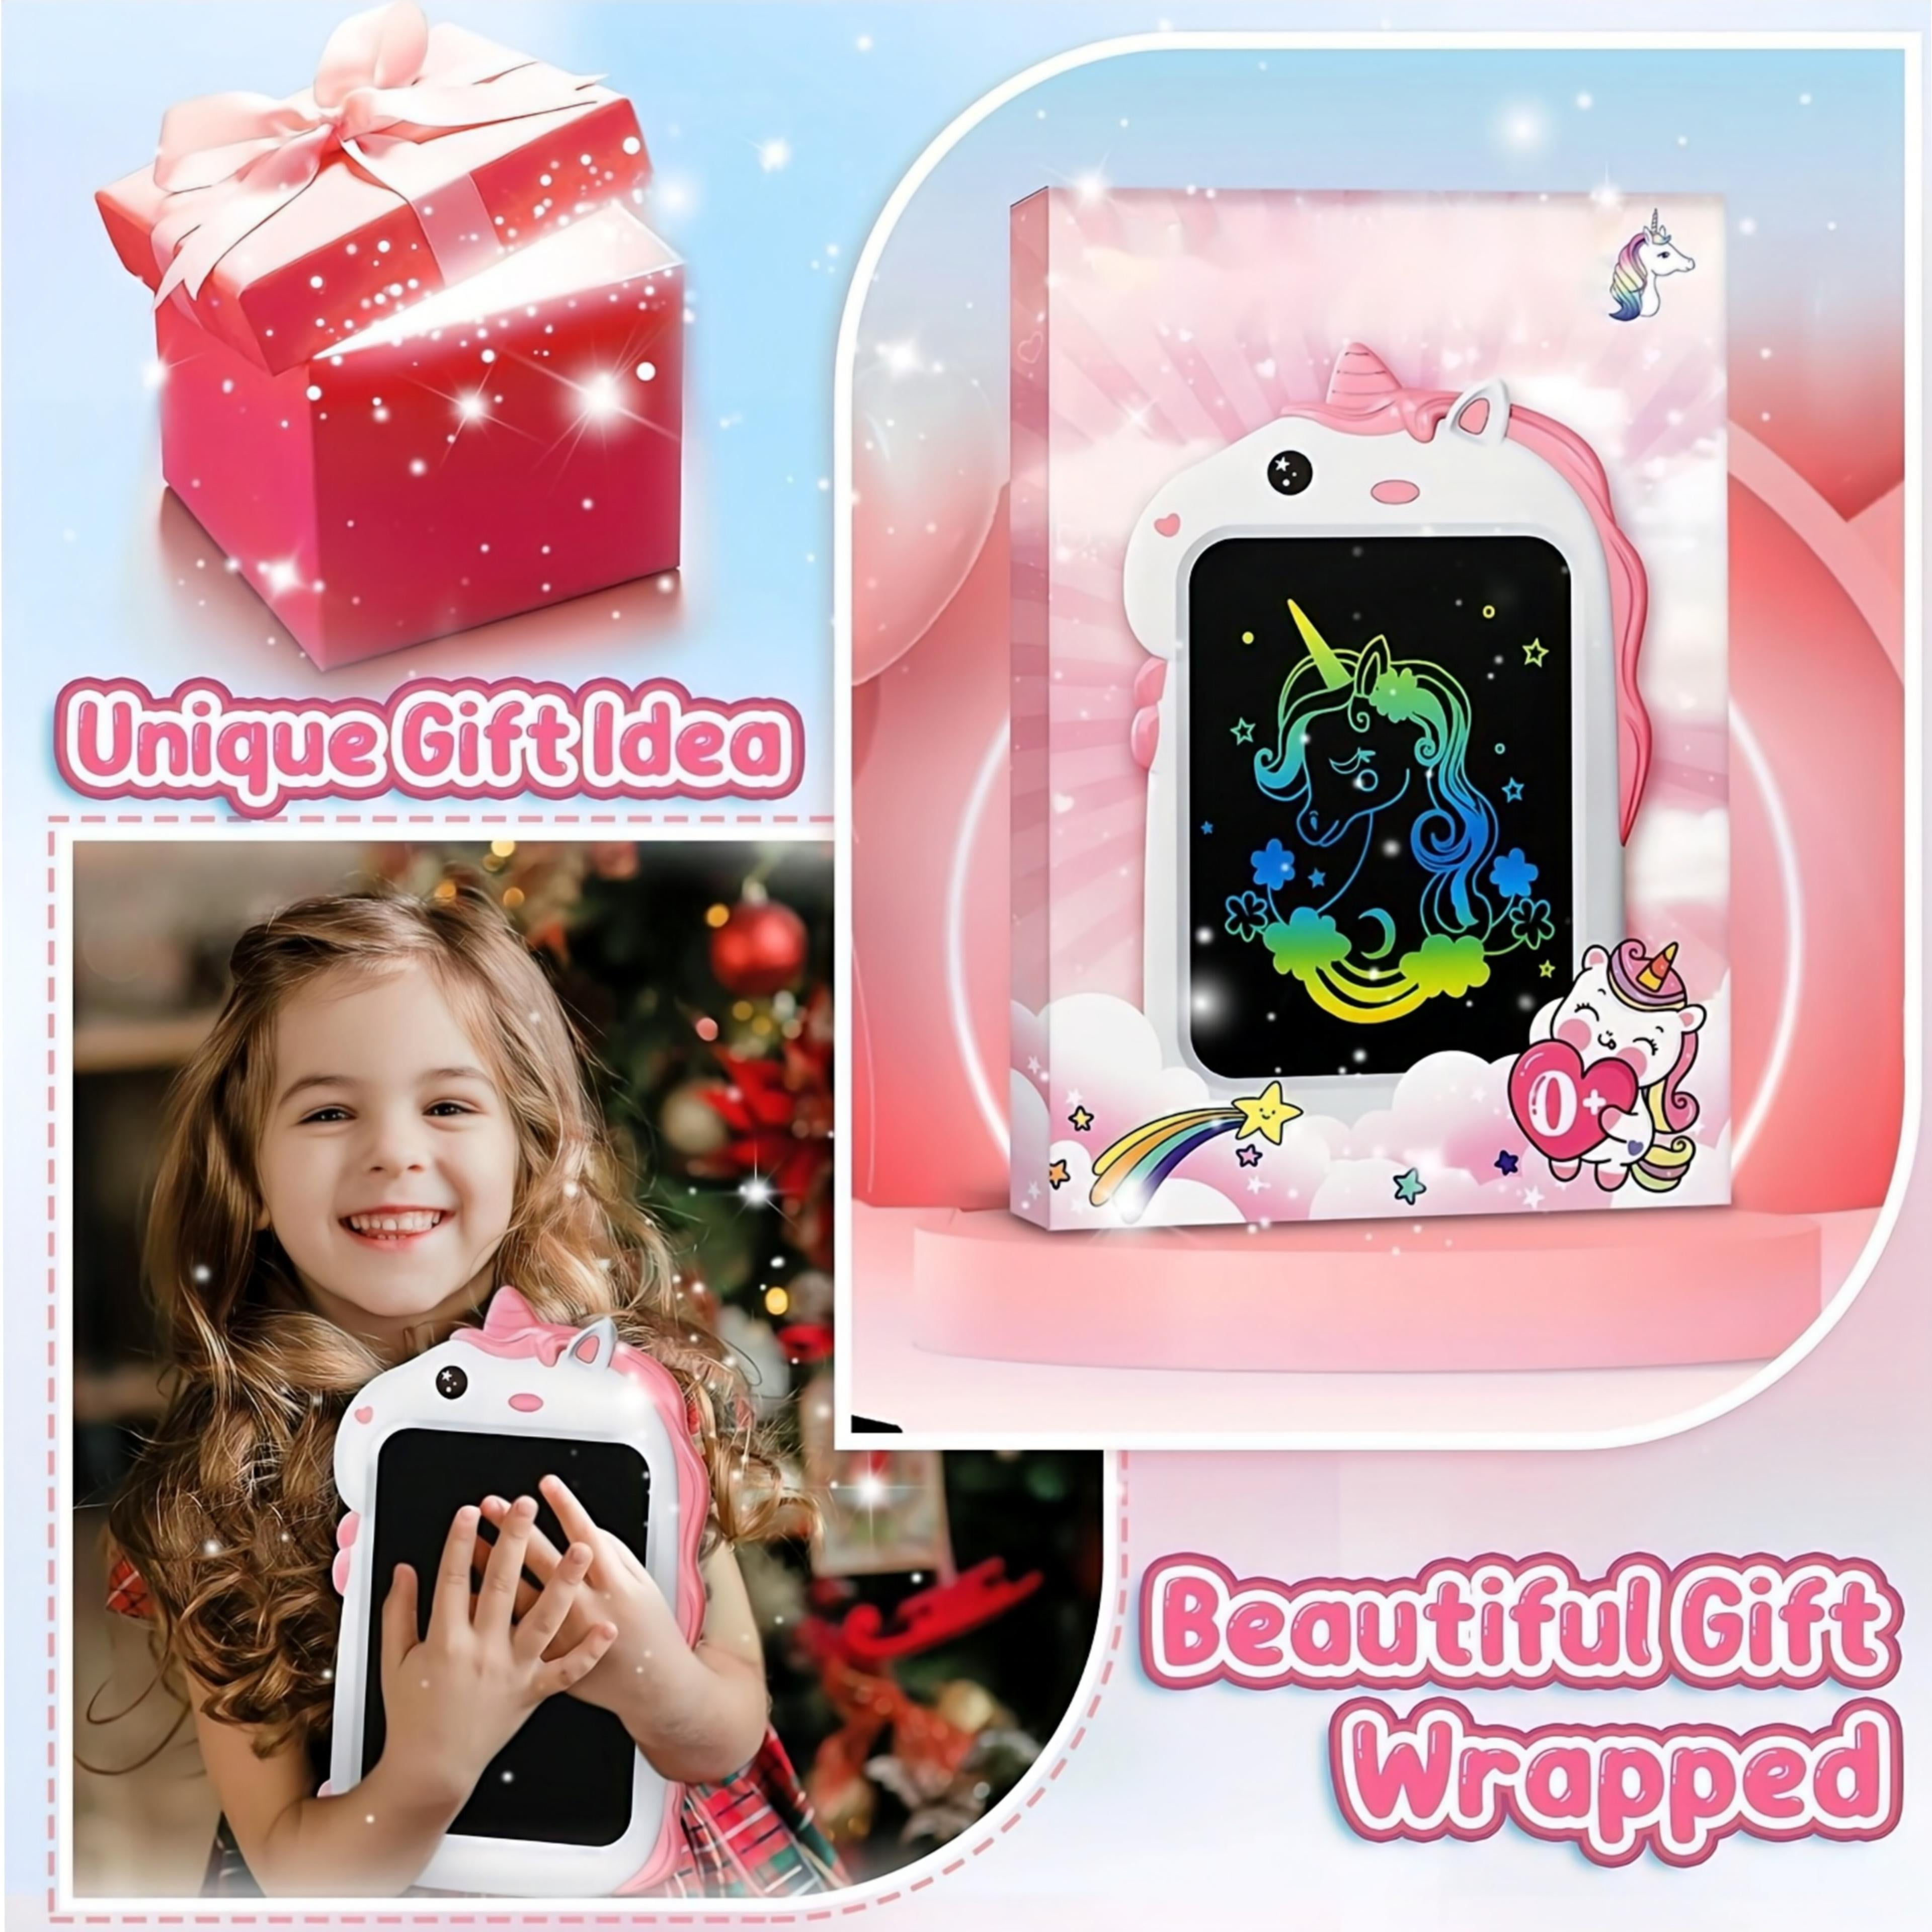 Unicorn LCD Writing Tablet Girls Toys, 8.5” Colorful Doodle Scribbler Board  Learning Drawing Pad Educational Toy Birthday for Kids Age 3 4 5 6 7 8 9 -  Yahoo Shopping